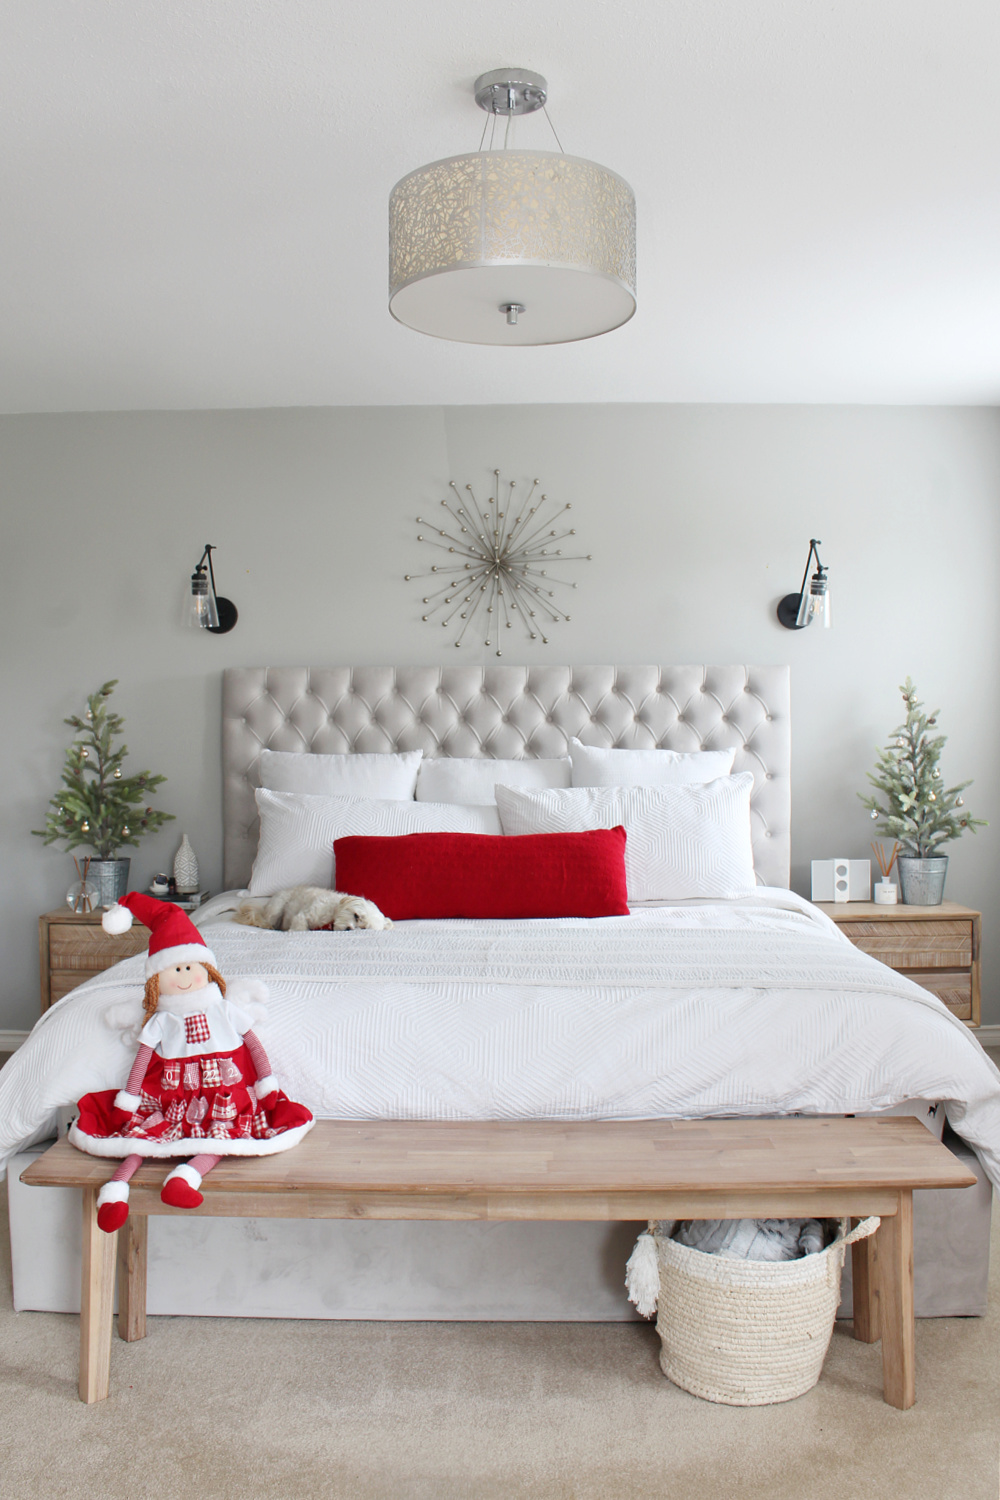 Red and white Christmas bedroom decor.